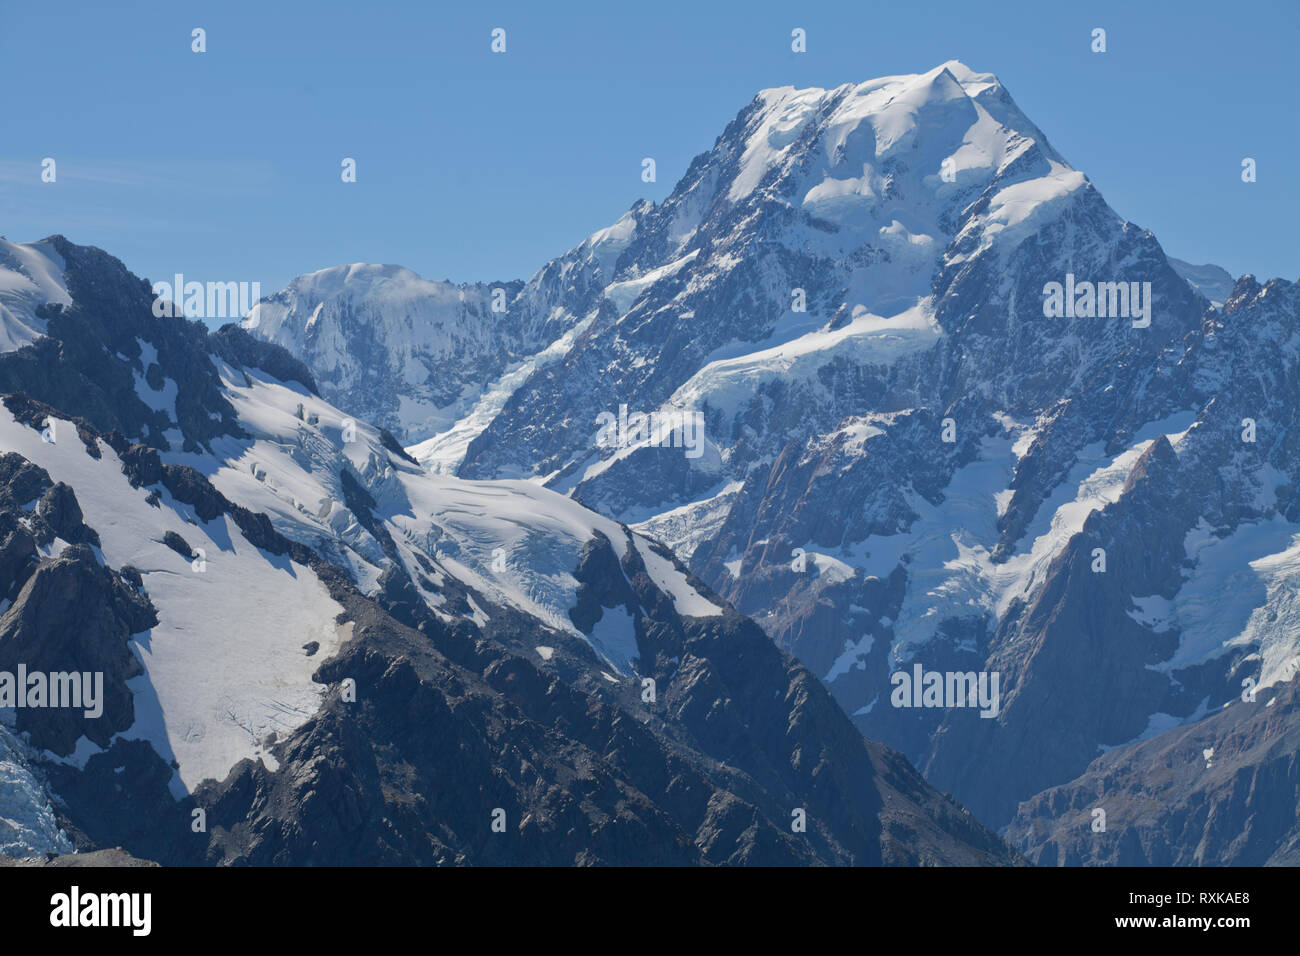 Aoraki Mount Cook Highest Mountain In New Zealand In The Southern Alps On The South Island Of New Zealand Telephoto View From Mount Cook Rd Stock Photo Alamy